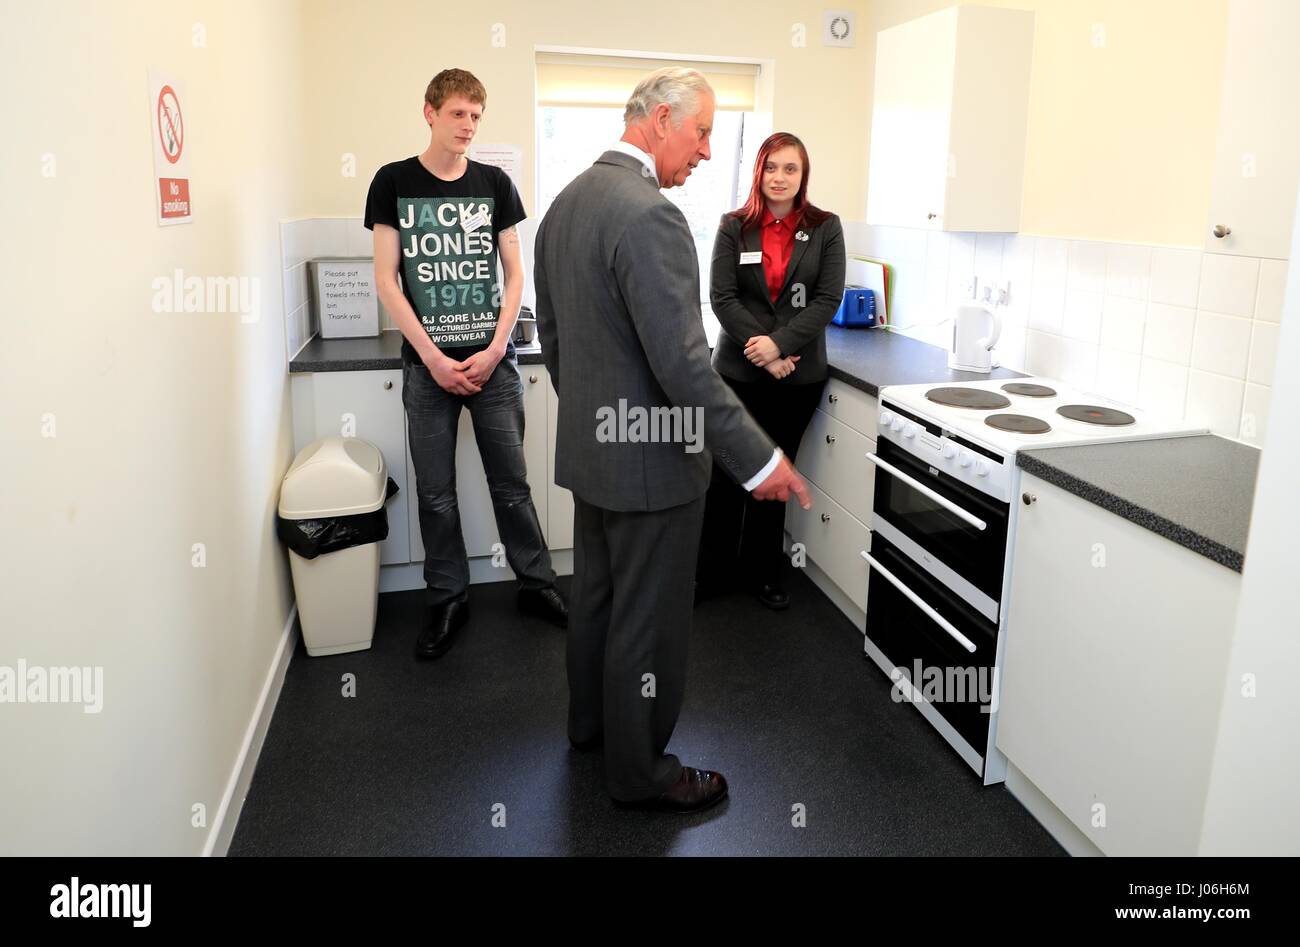 The Prince of Wales meets staff as he opens the new Whitehaven Foyer, a charity partnership which provides accommodation and support services to local young people in housing need during a visit to Whitehaven in Cumbria. Stock Photo